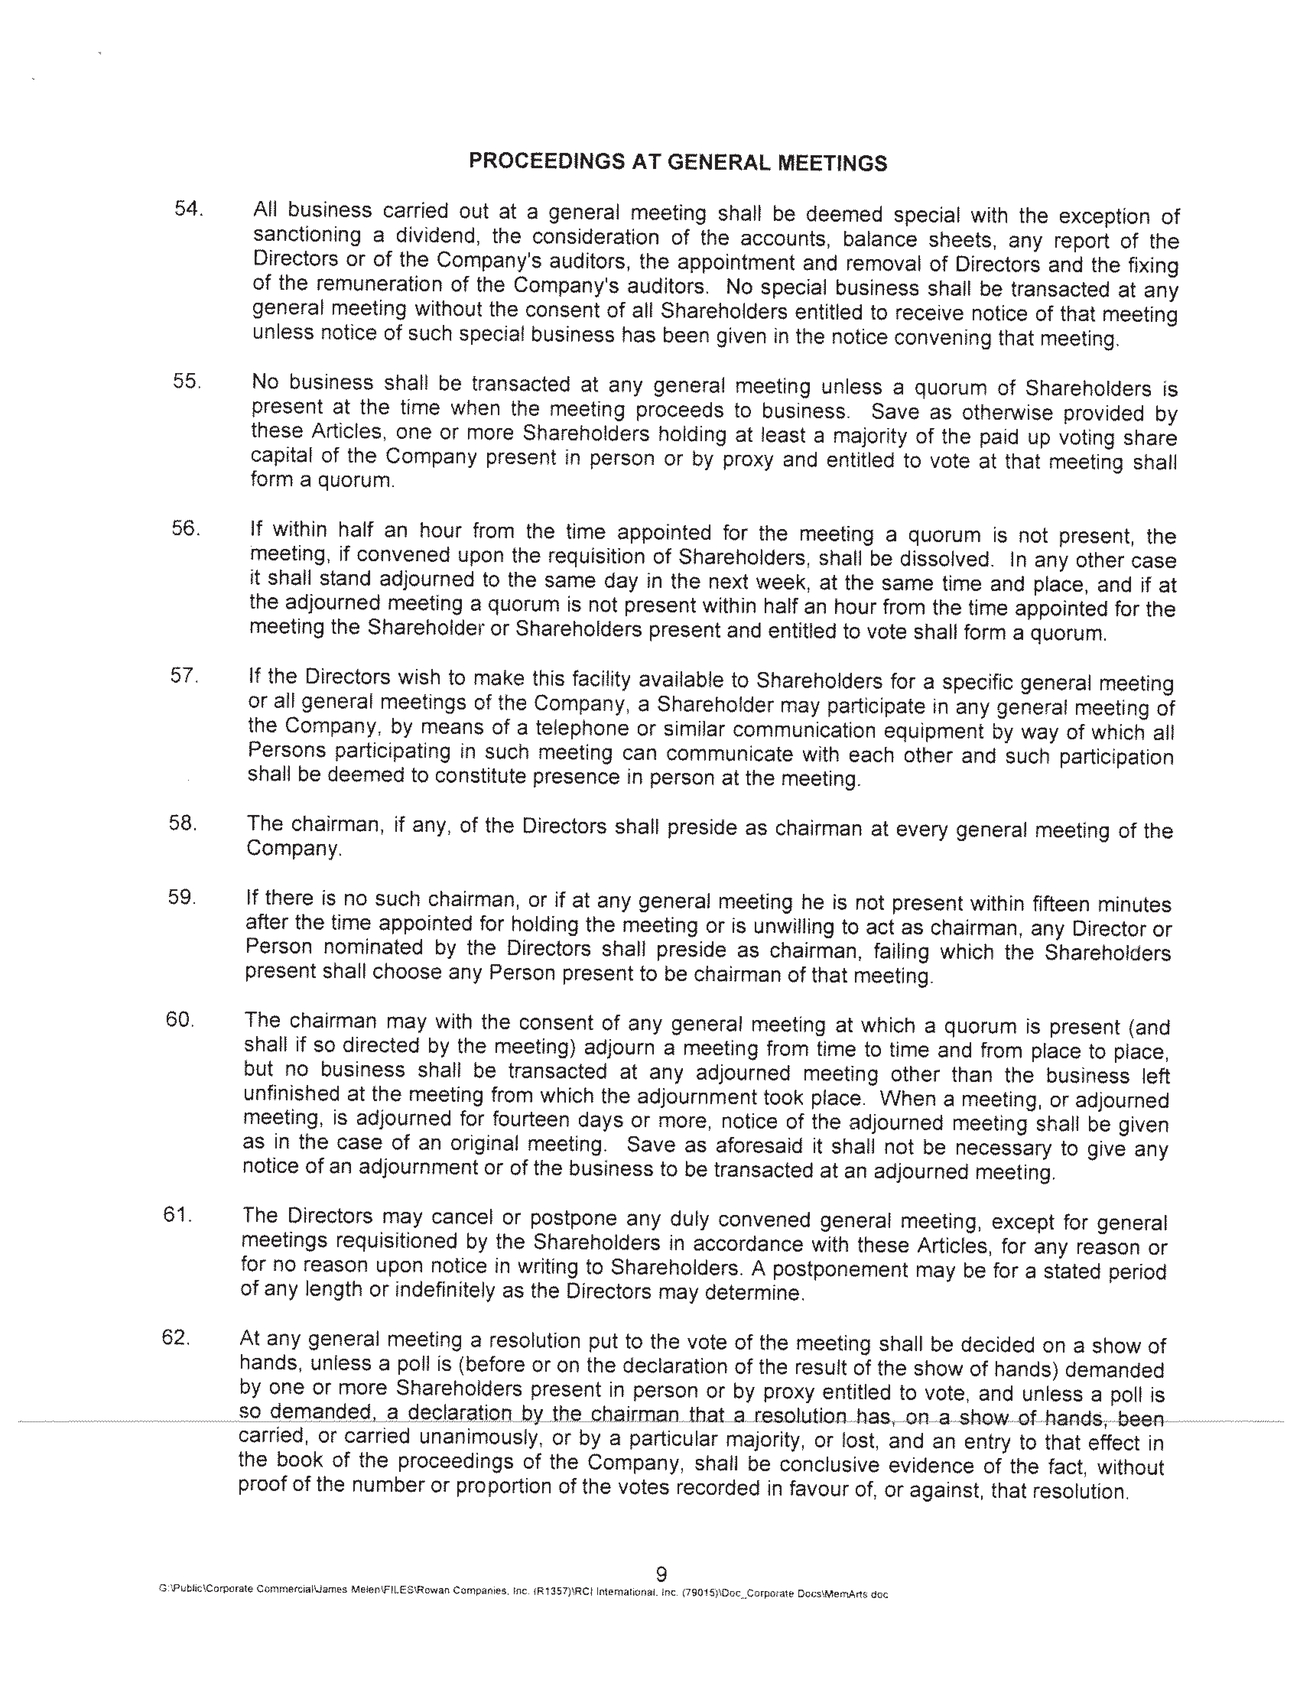 New Microsoft Word Document - Copy_page003page020page001 memorandum and articles of association of rci international inc_page014.jpg